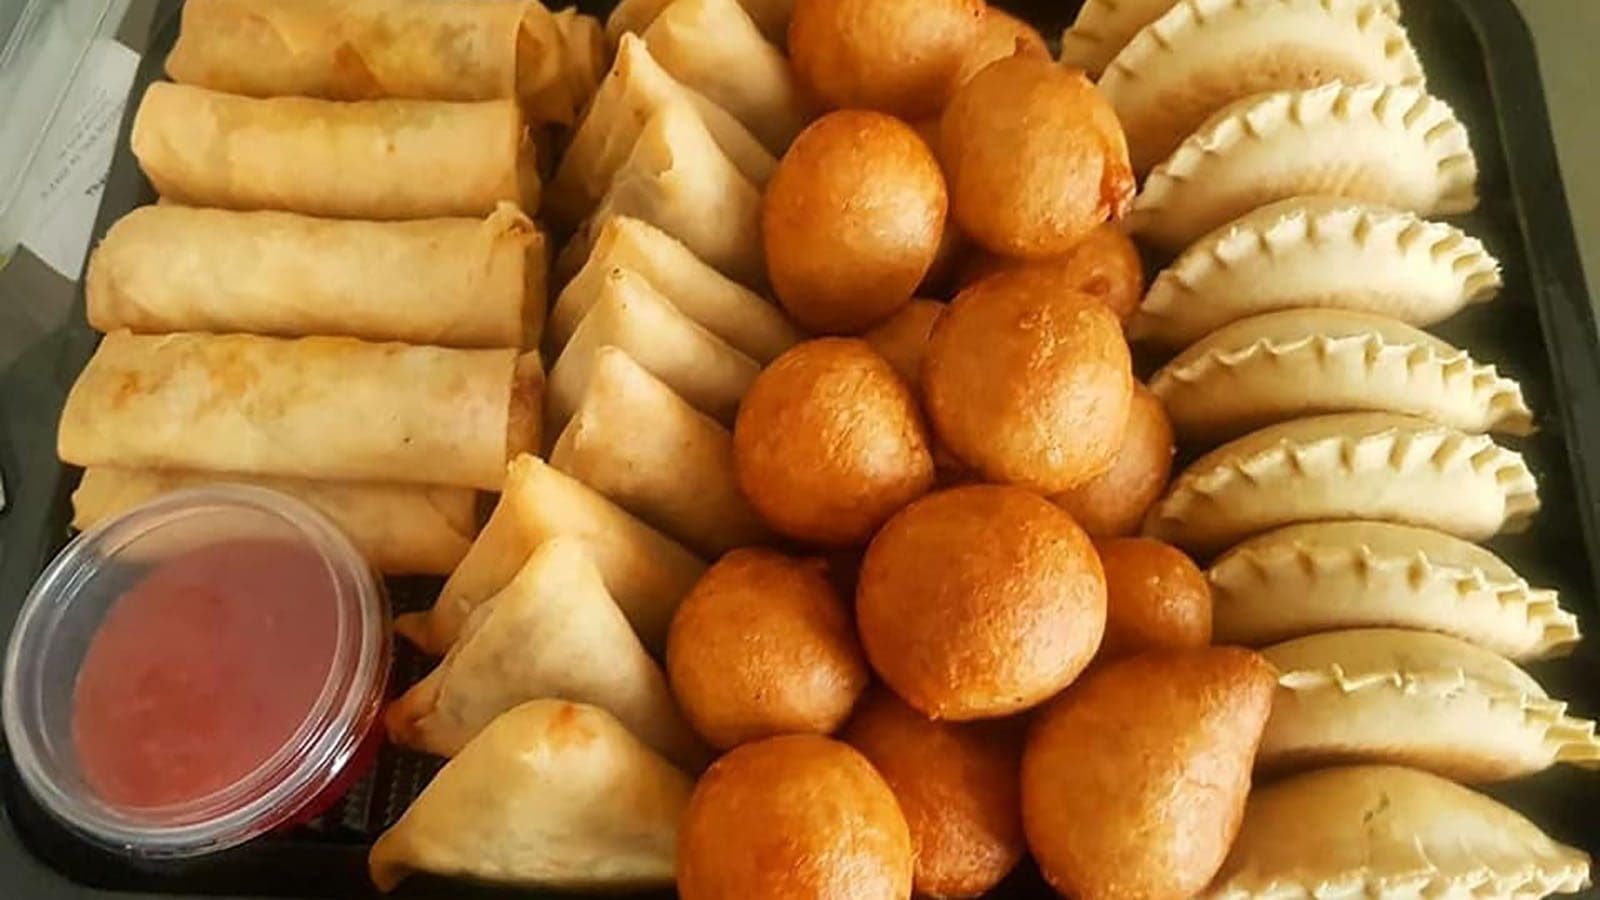 Nigerian finger foods maker smallChops plans expansion beyond Lagos after strong post-COVID growth